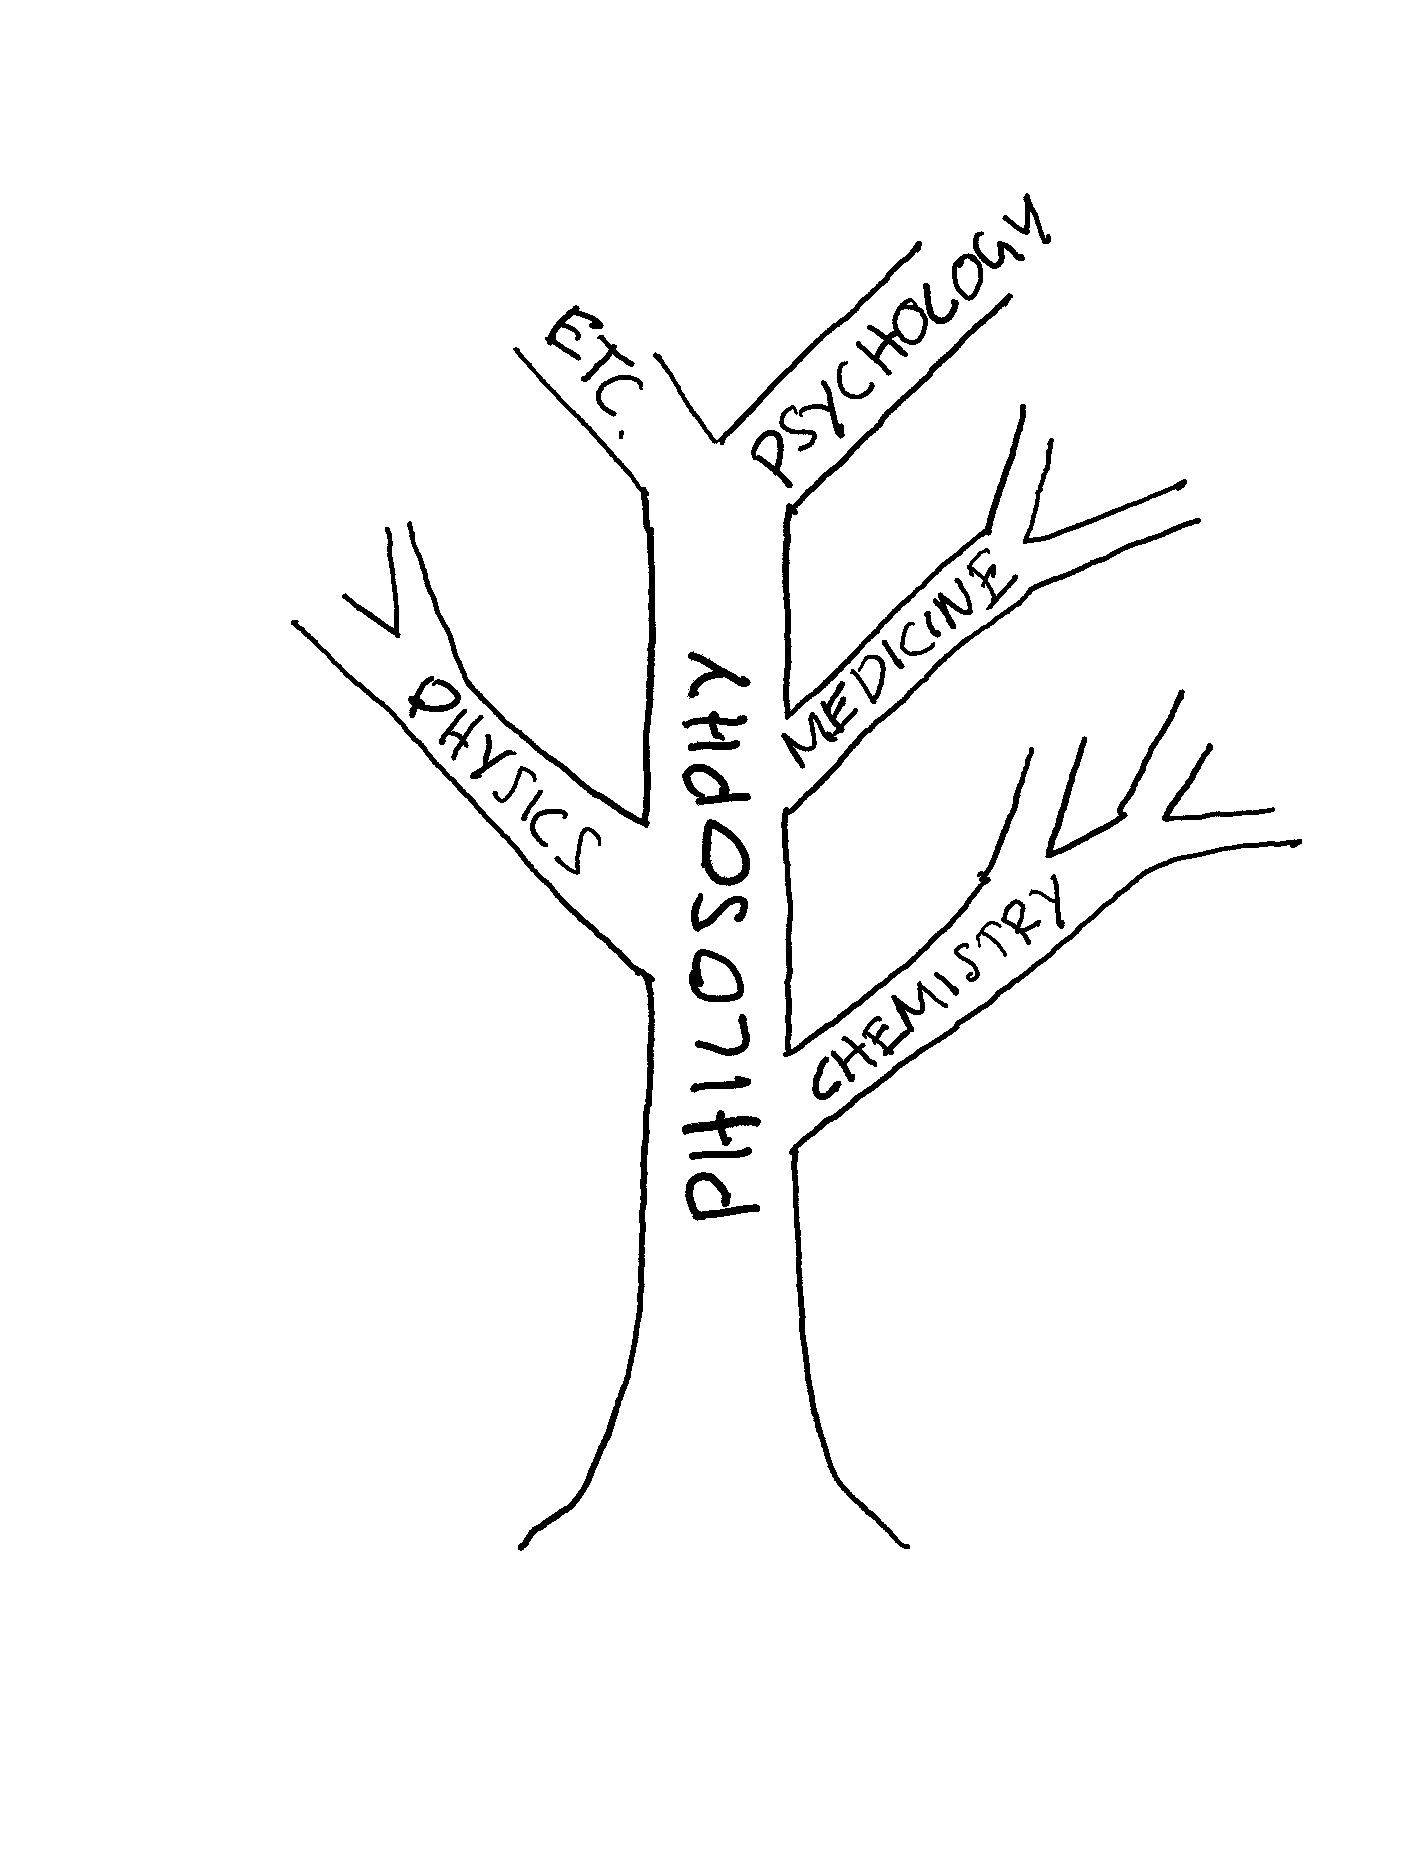 Picture of philosophy as the trunk of a tree